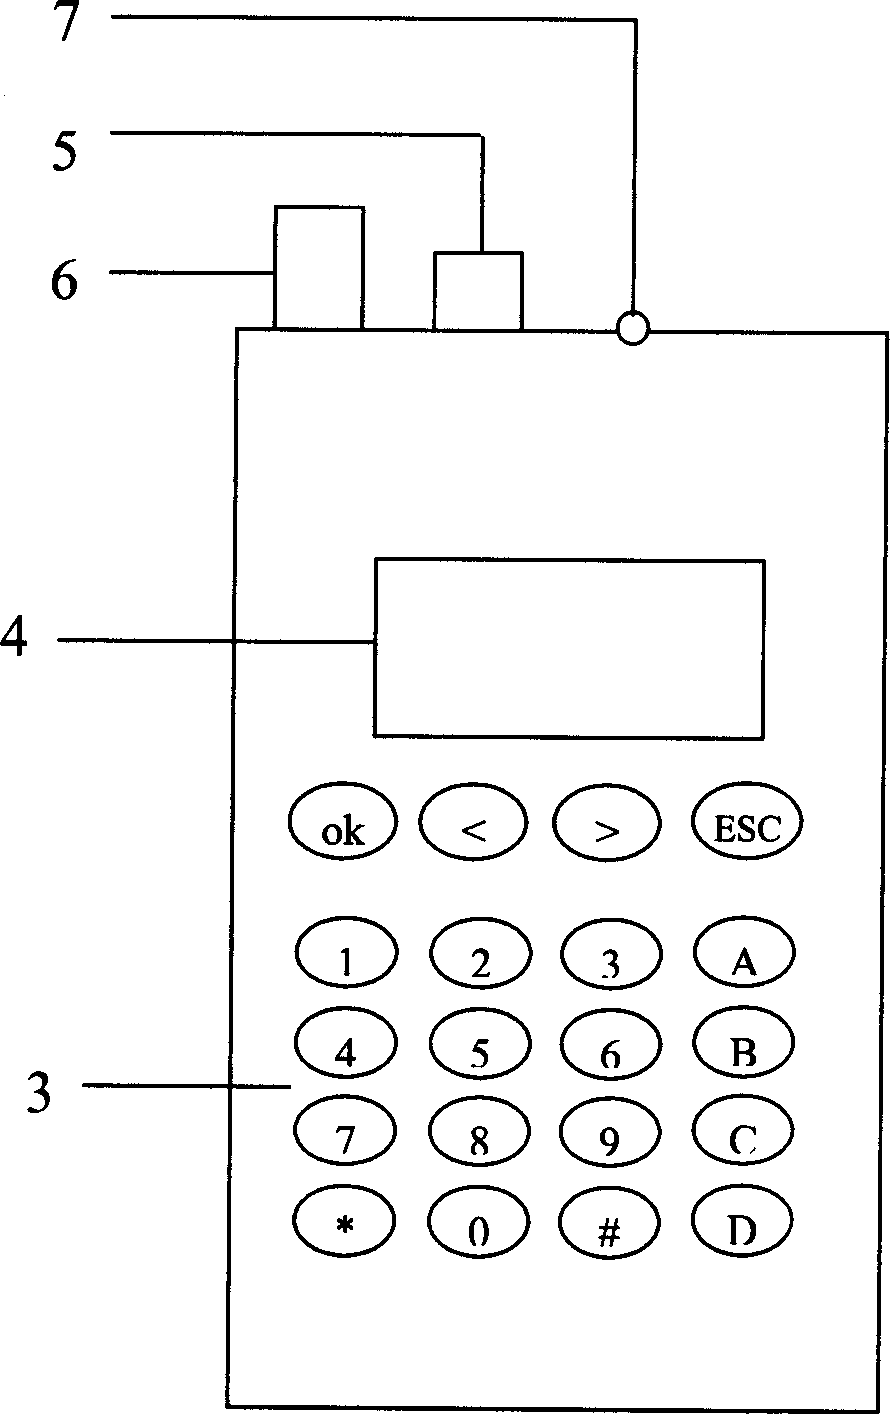 Radio communication Long-distance gate management system and apparatus